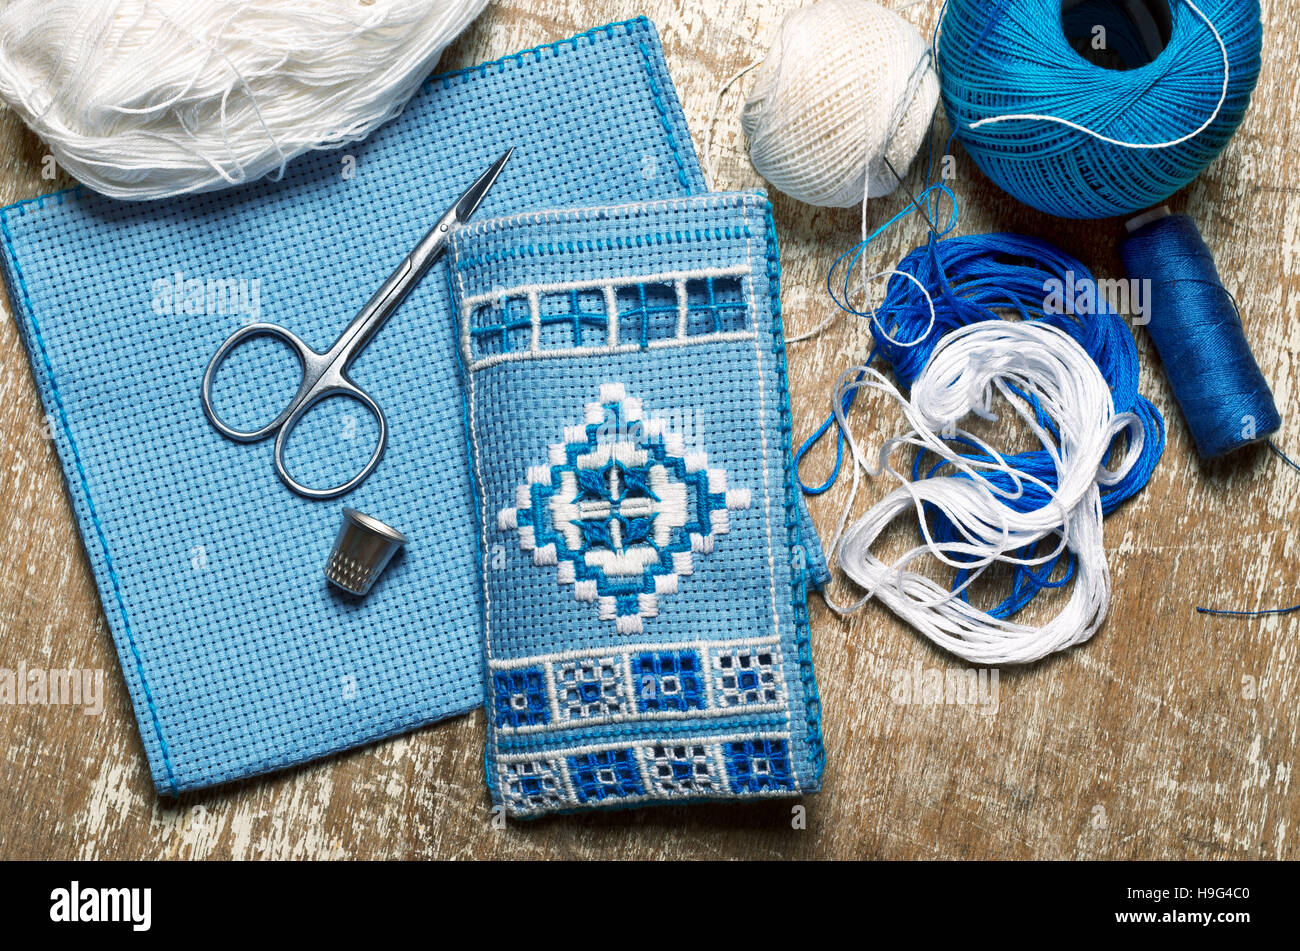 Hardanger embroidery blue and white colors with instruments Stock Photo